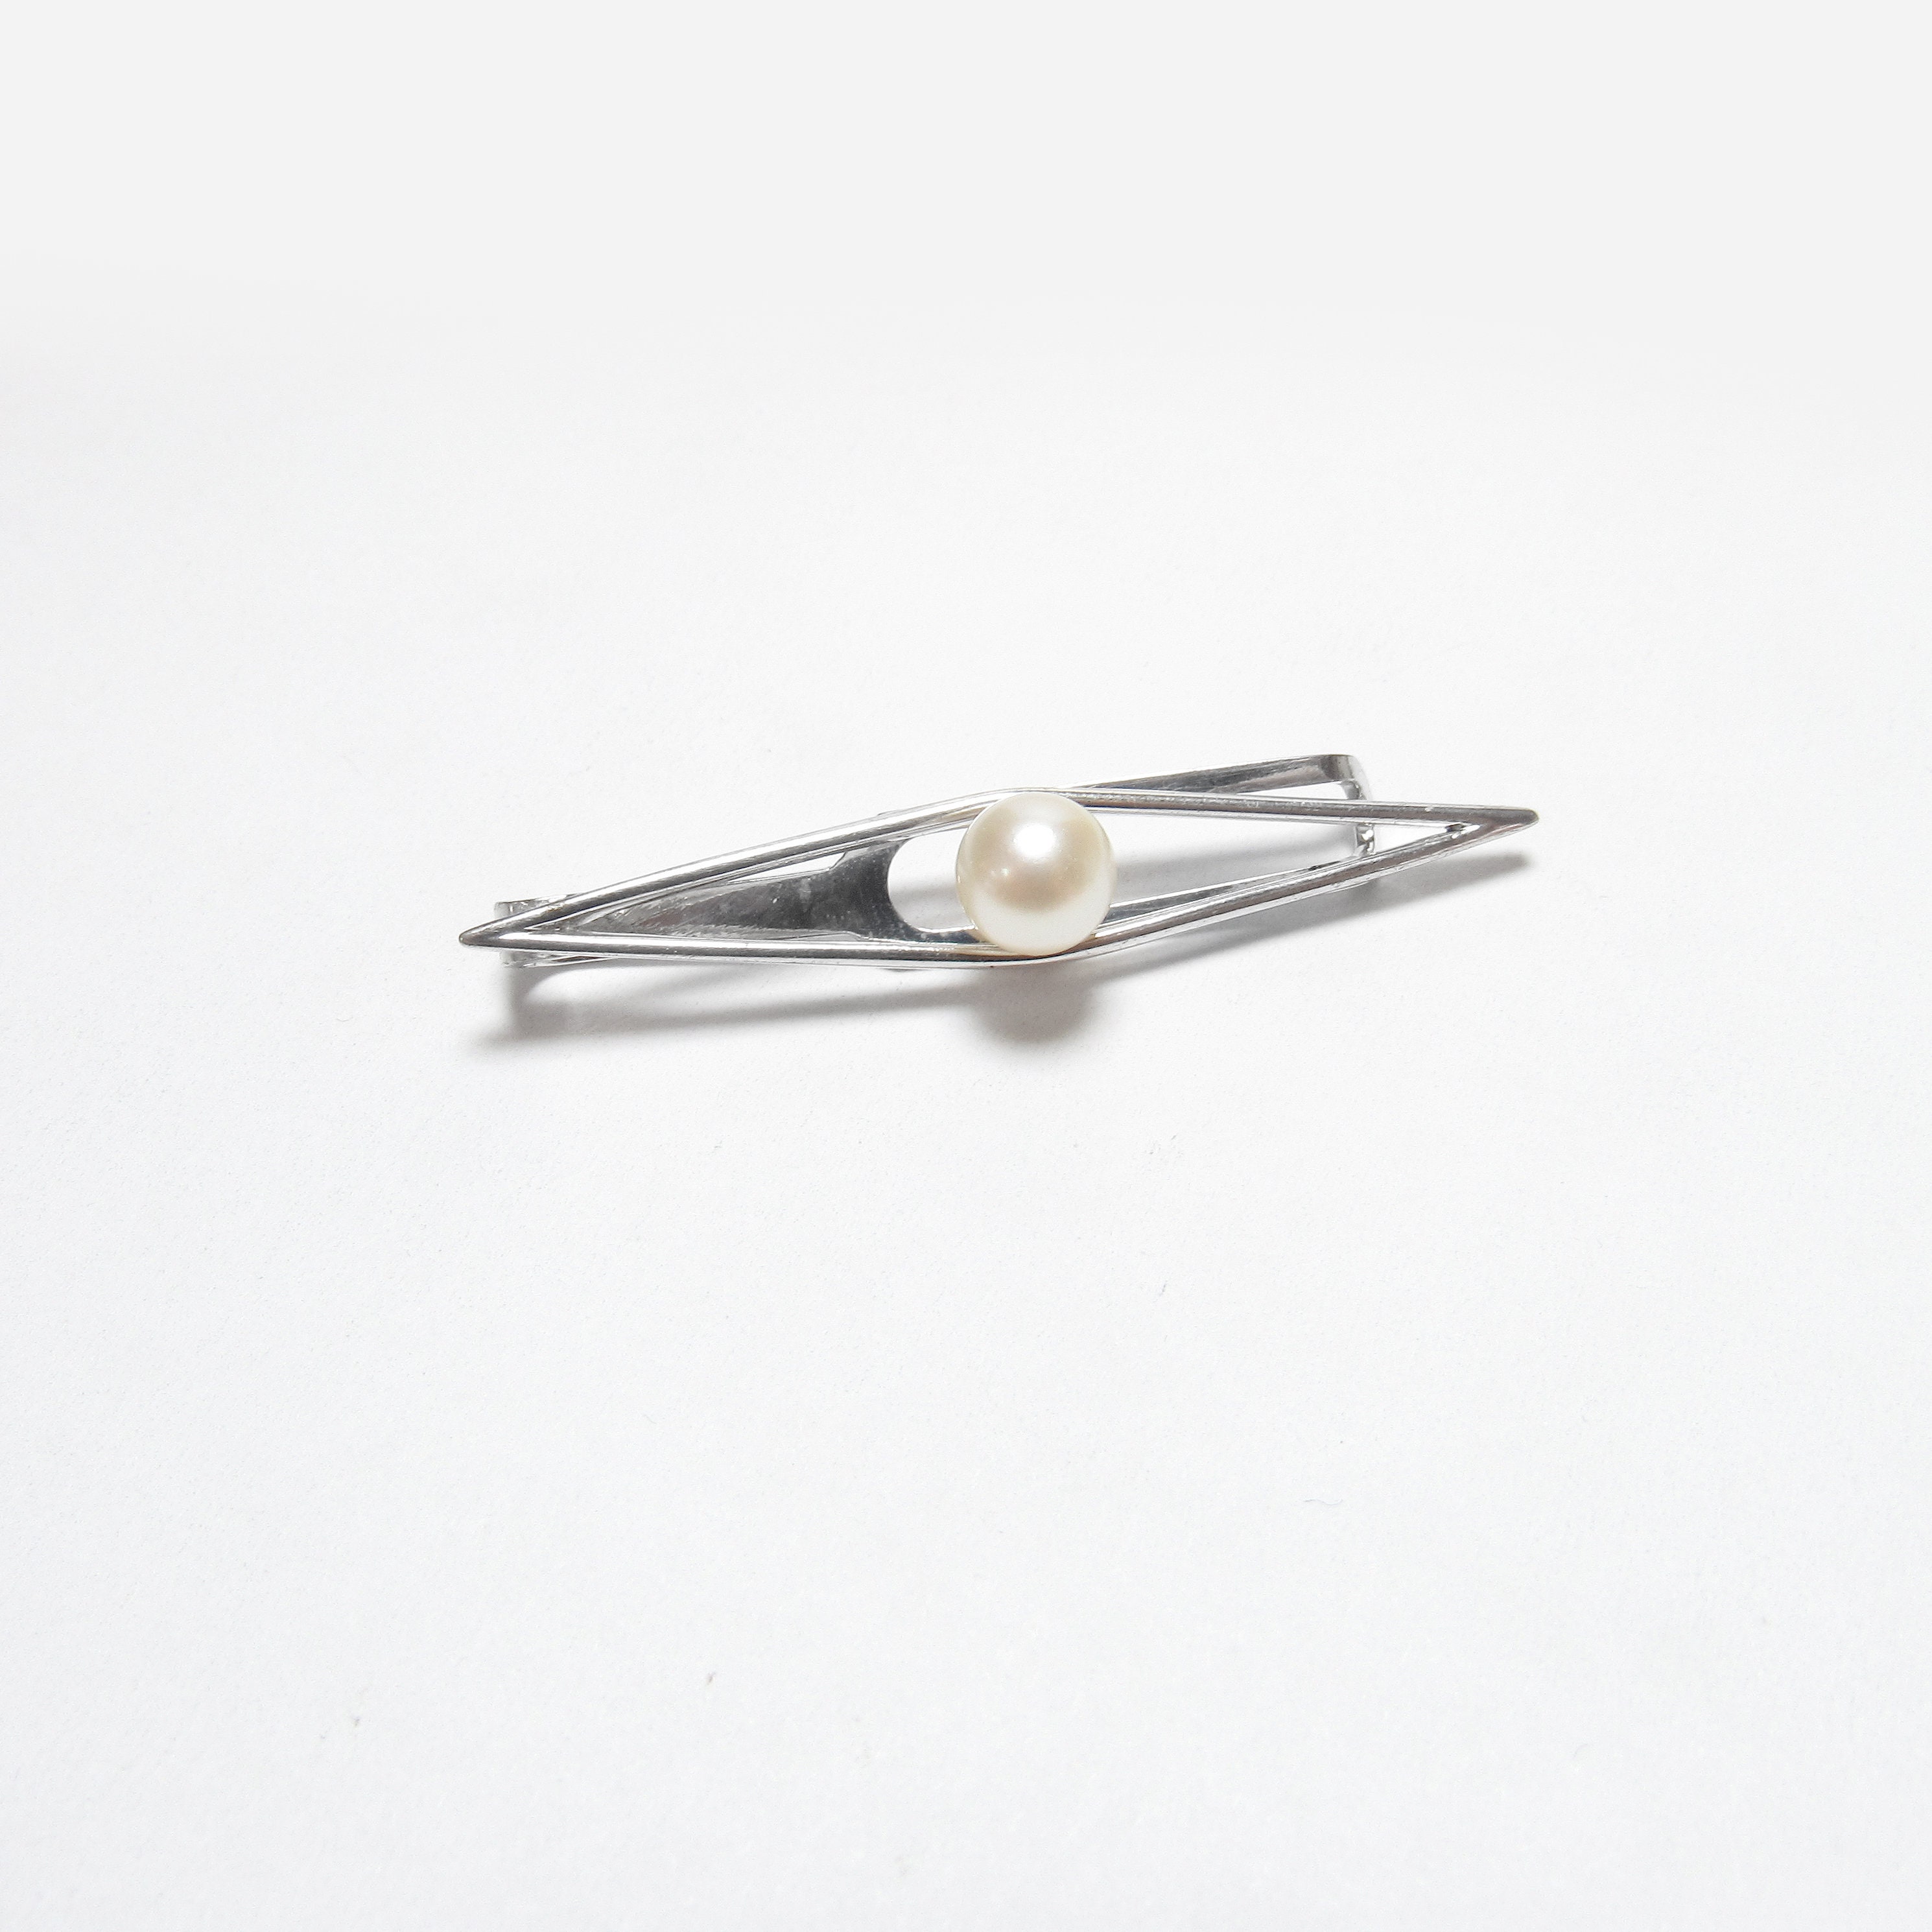 Tie Clips, Tie Bars, Tie Pins Suppliers, Manufacturers - B2B Marketplace